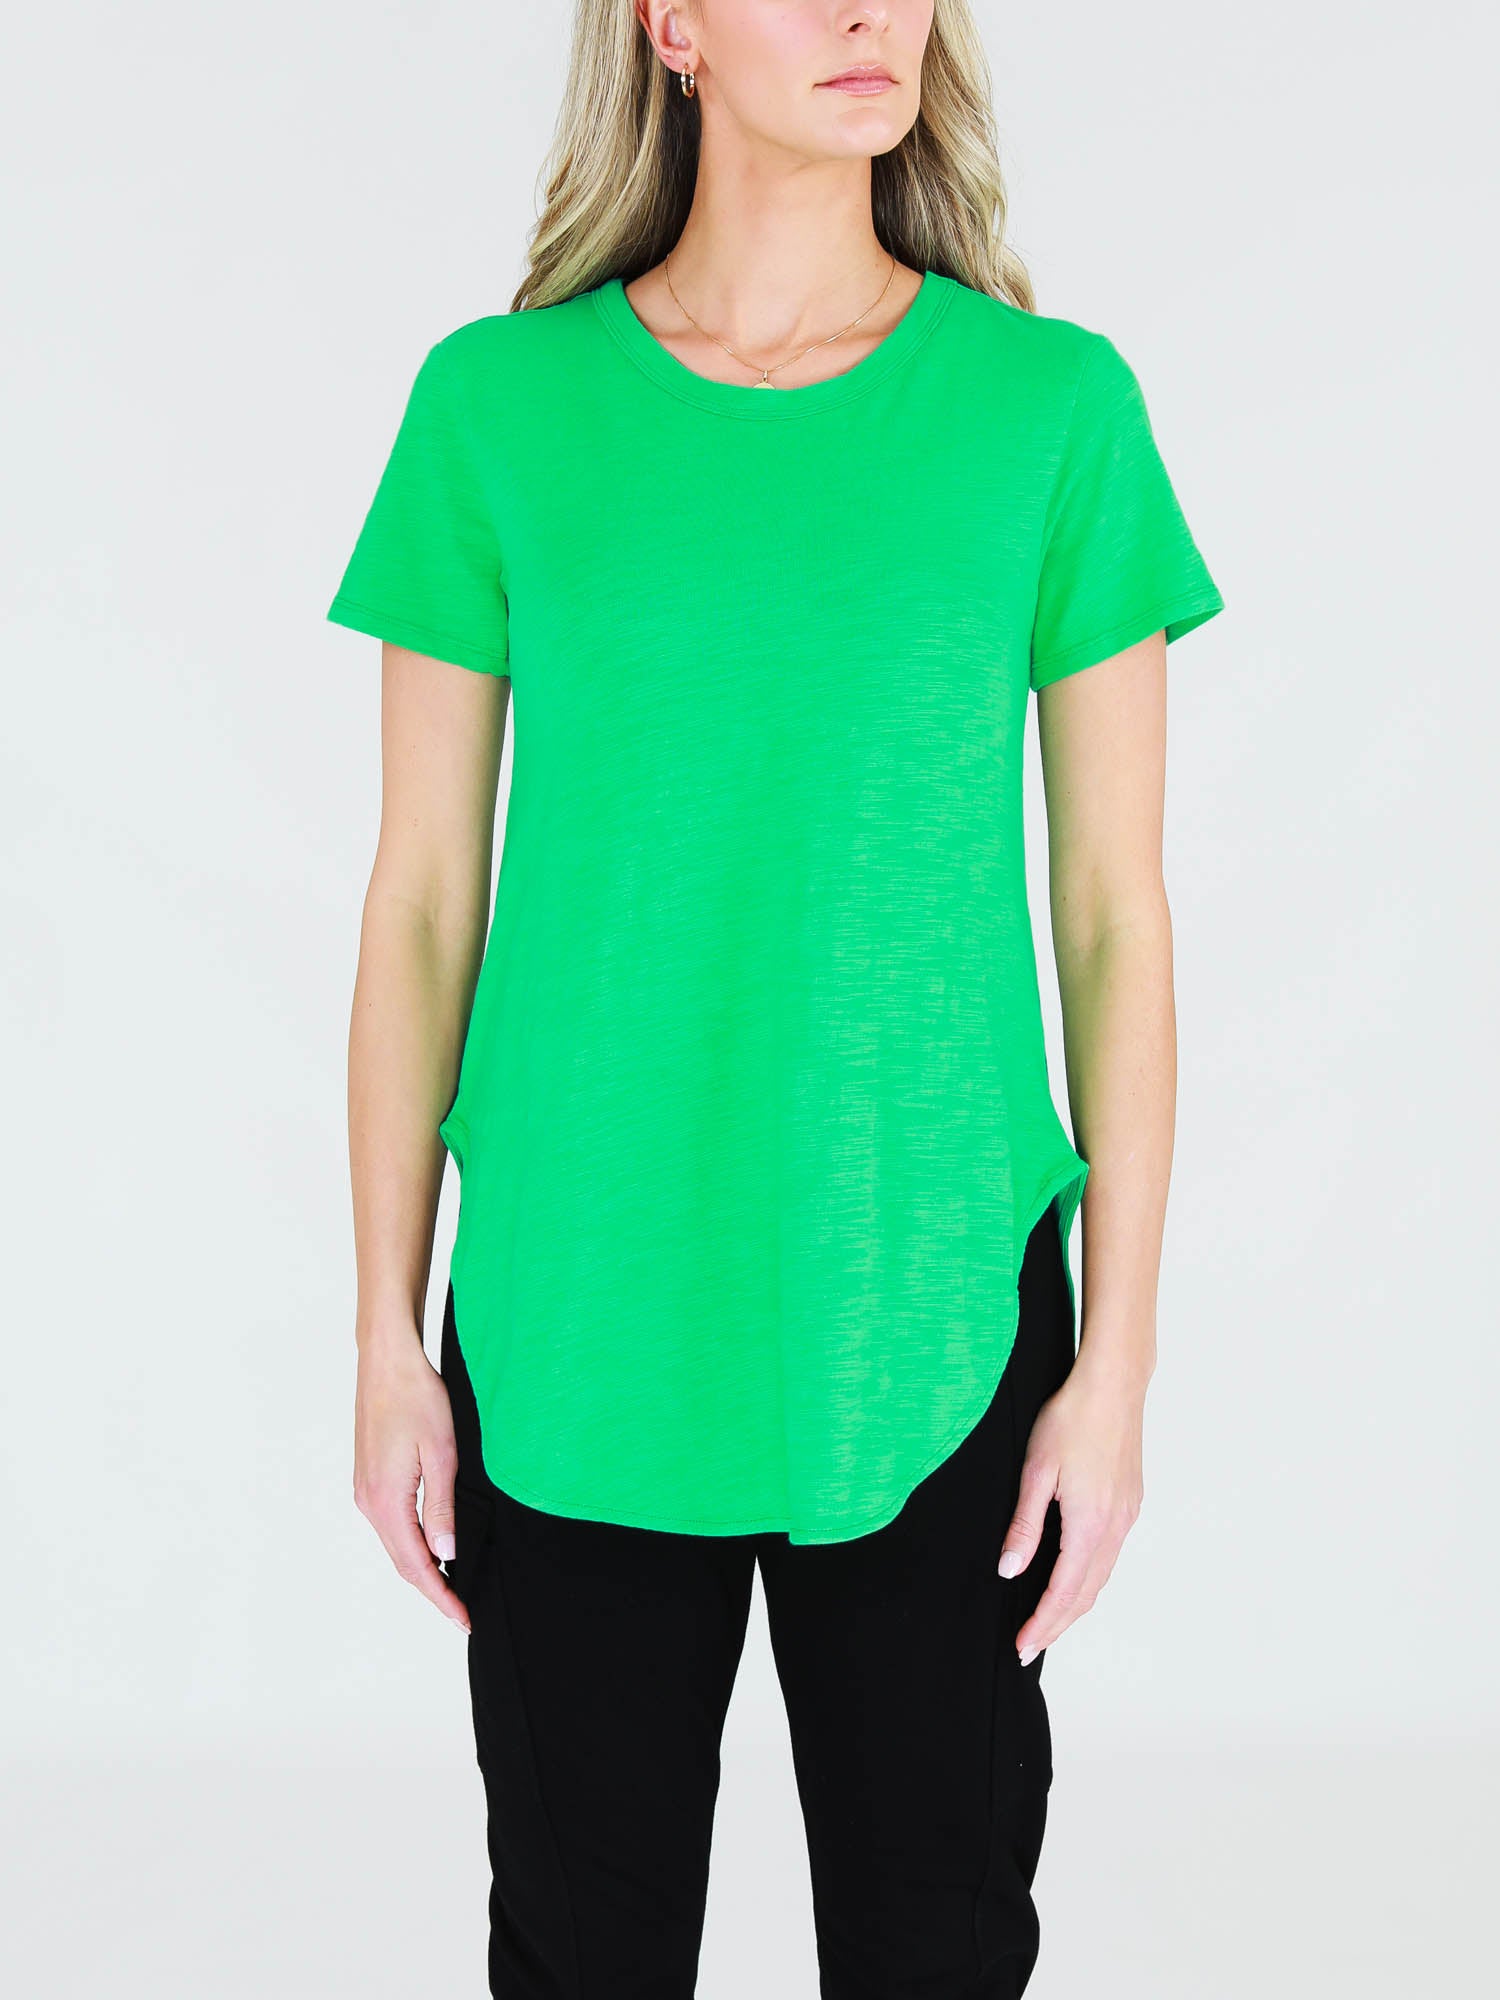 bright green t shirt #color_nephrite